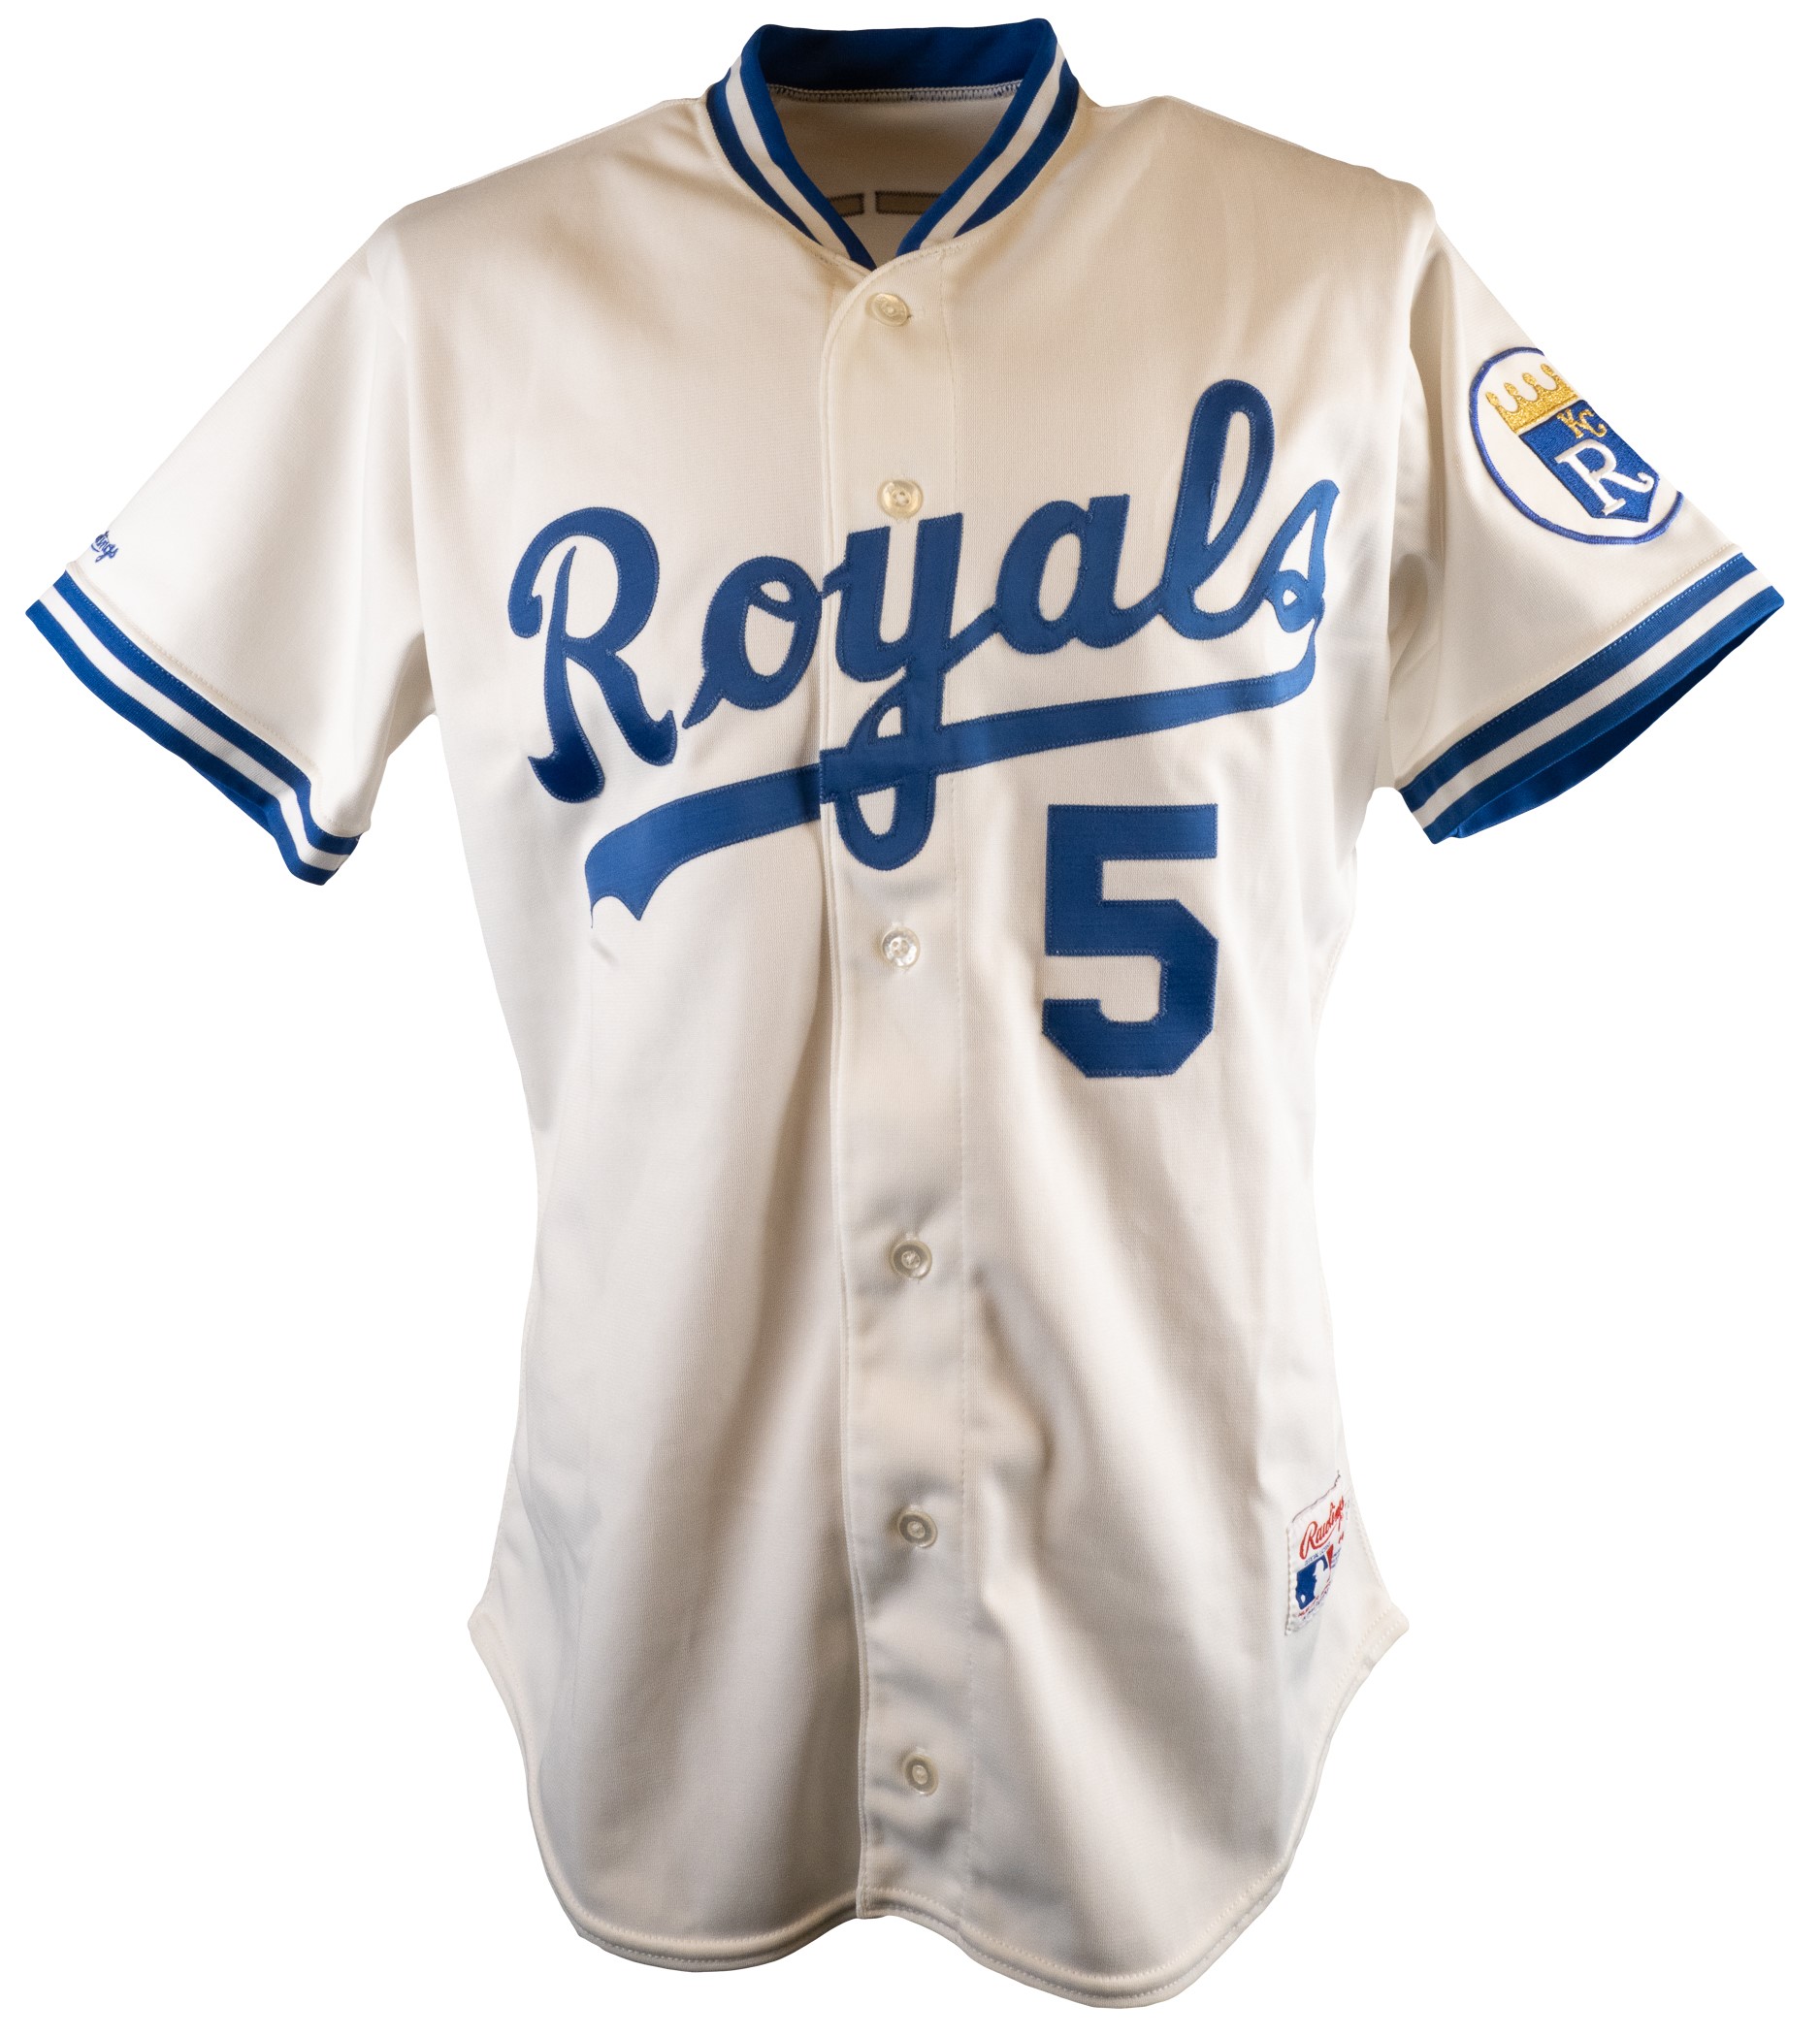 The official auction site of Royals Auctions